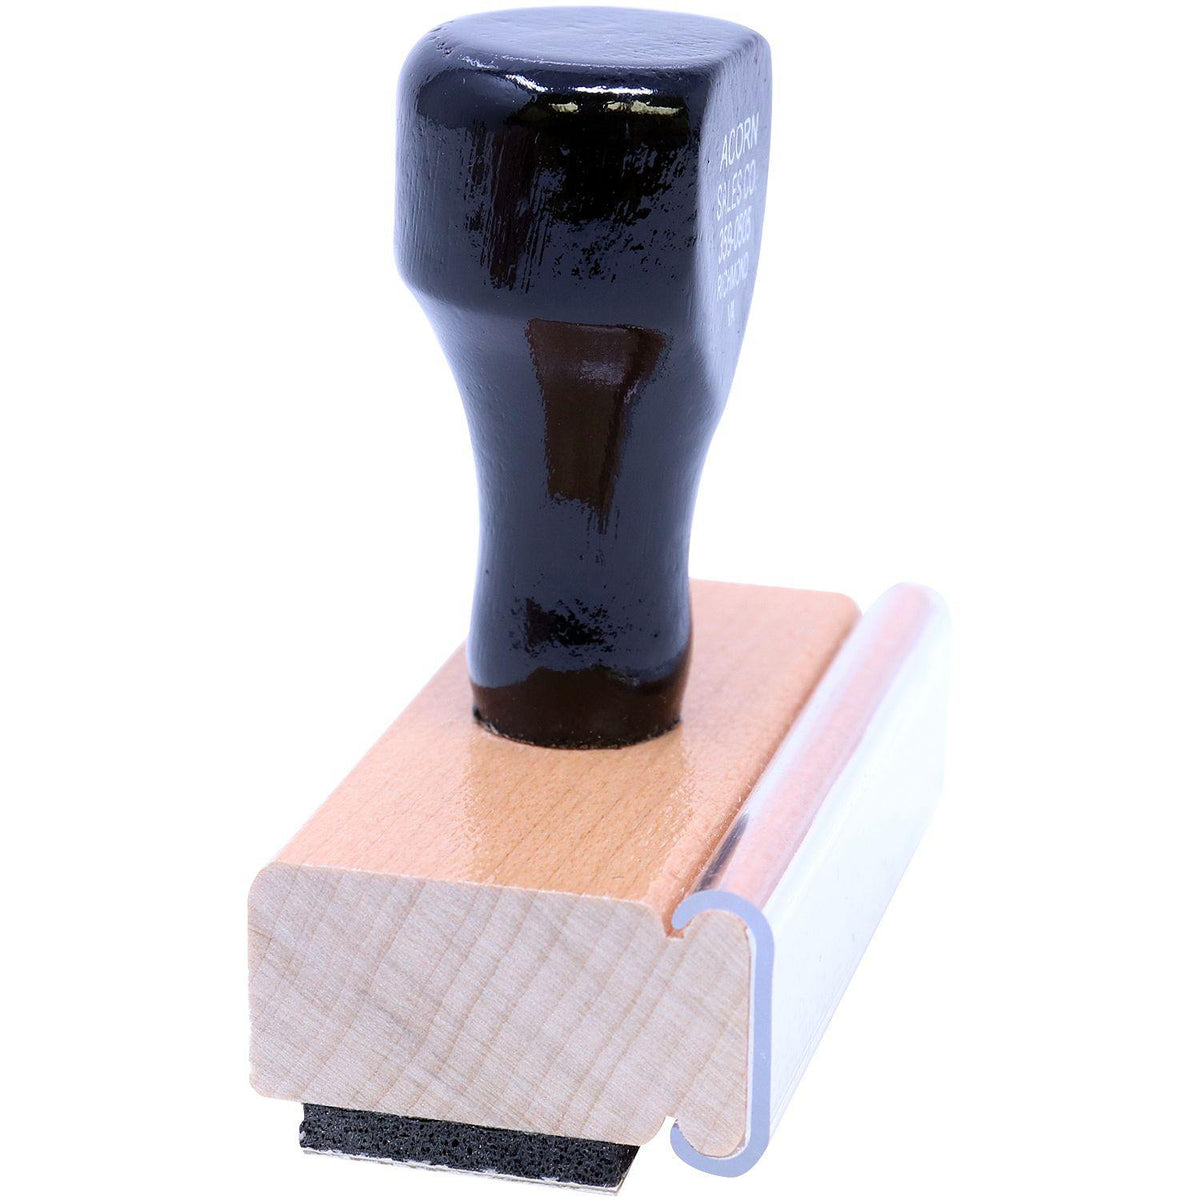 Side View of Large Review and Sign Rubber Stamp at an Angle